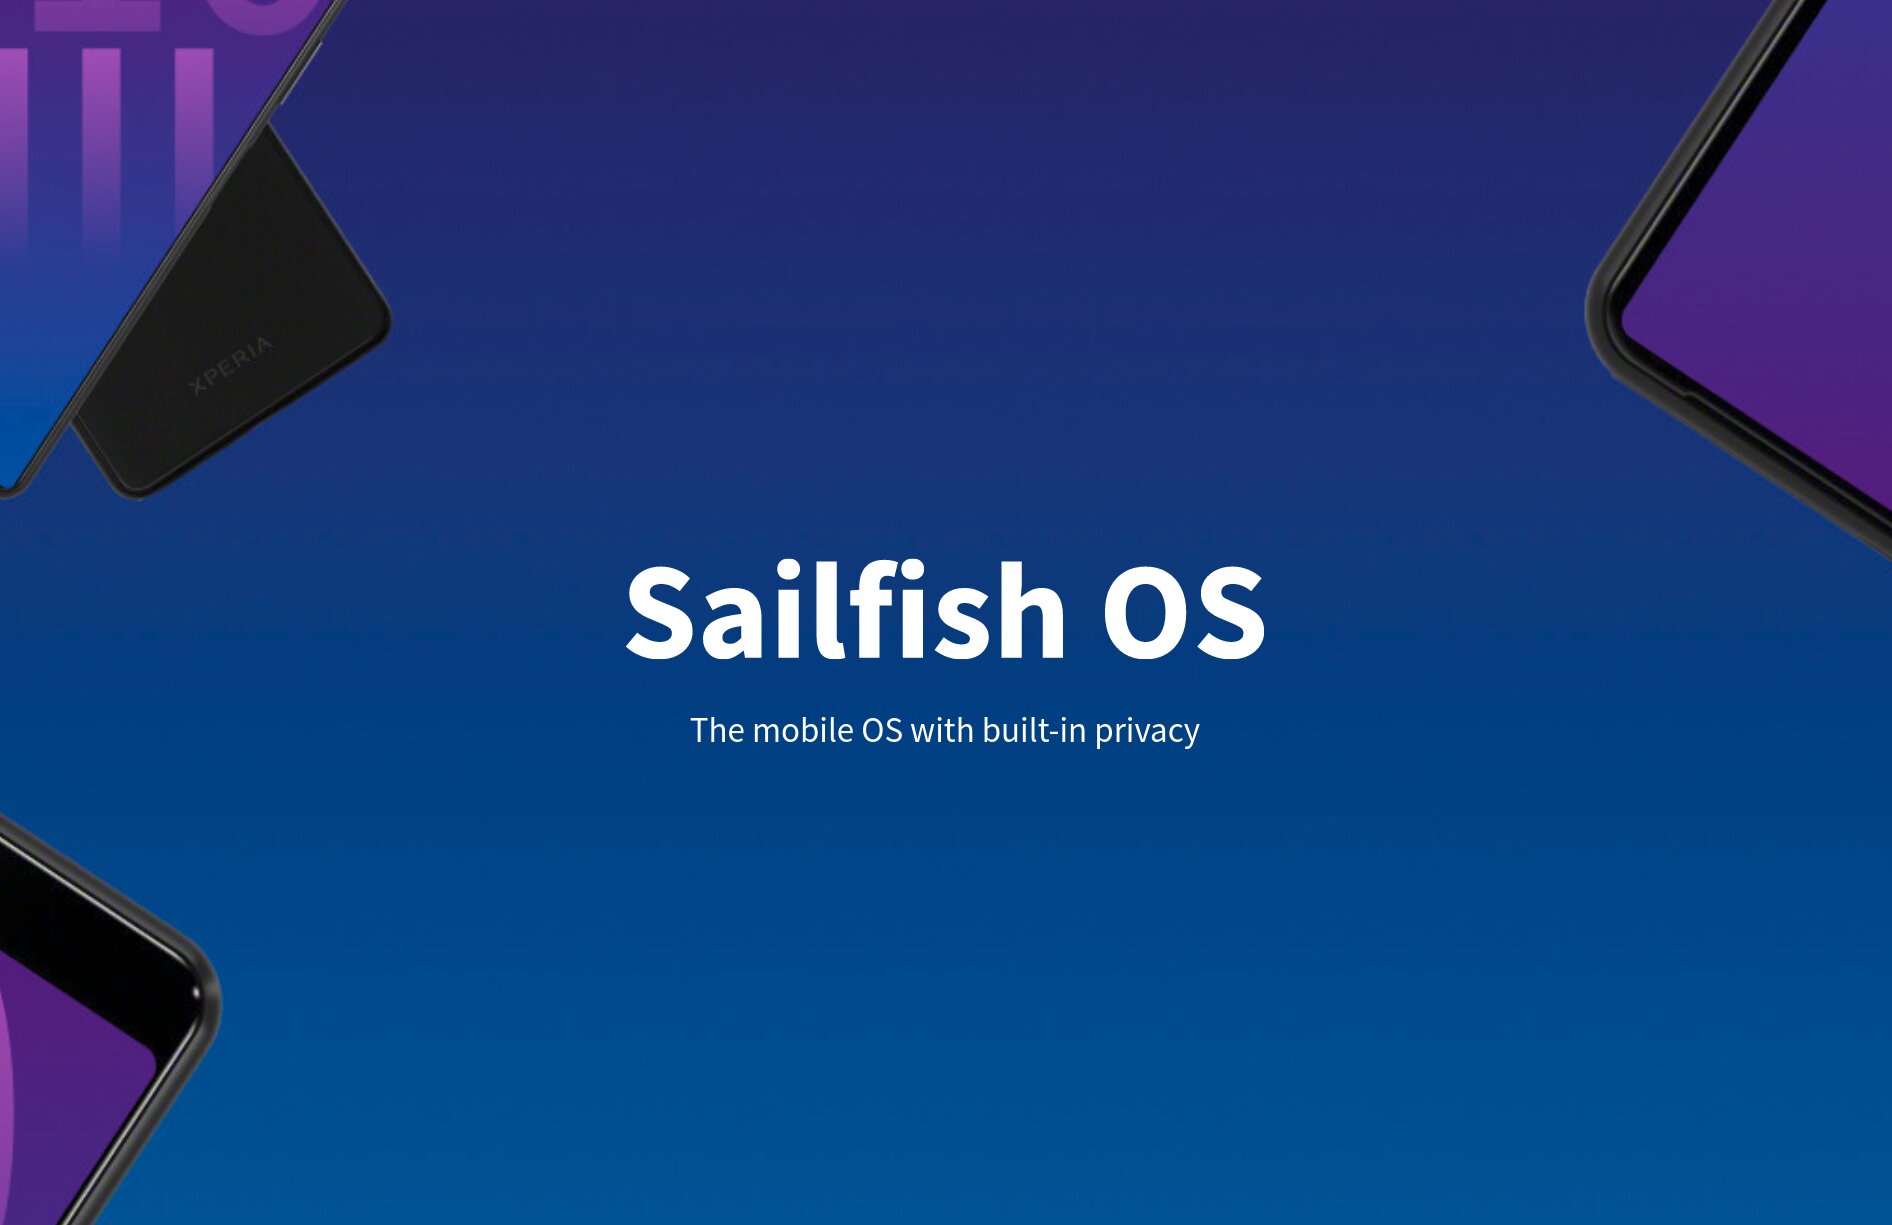 The secure OS's home page: Sailfish OS for mobile.